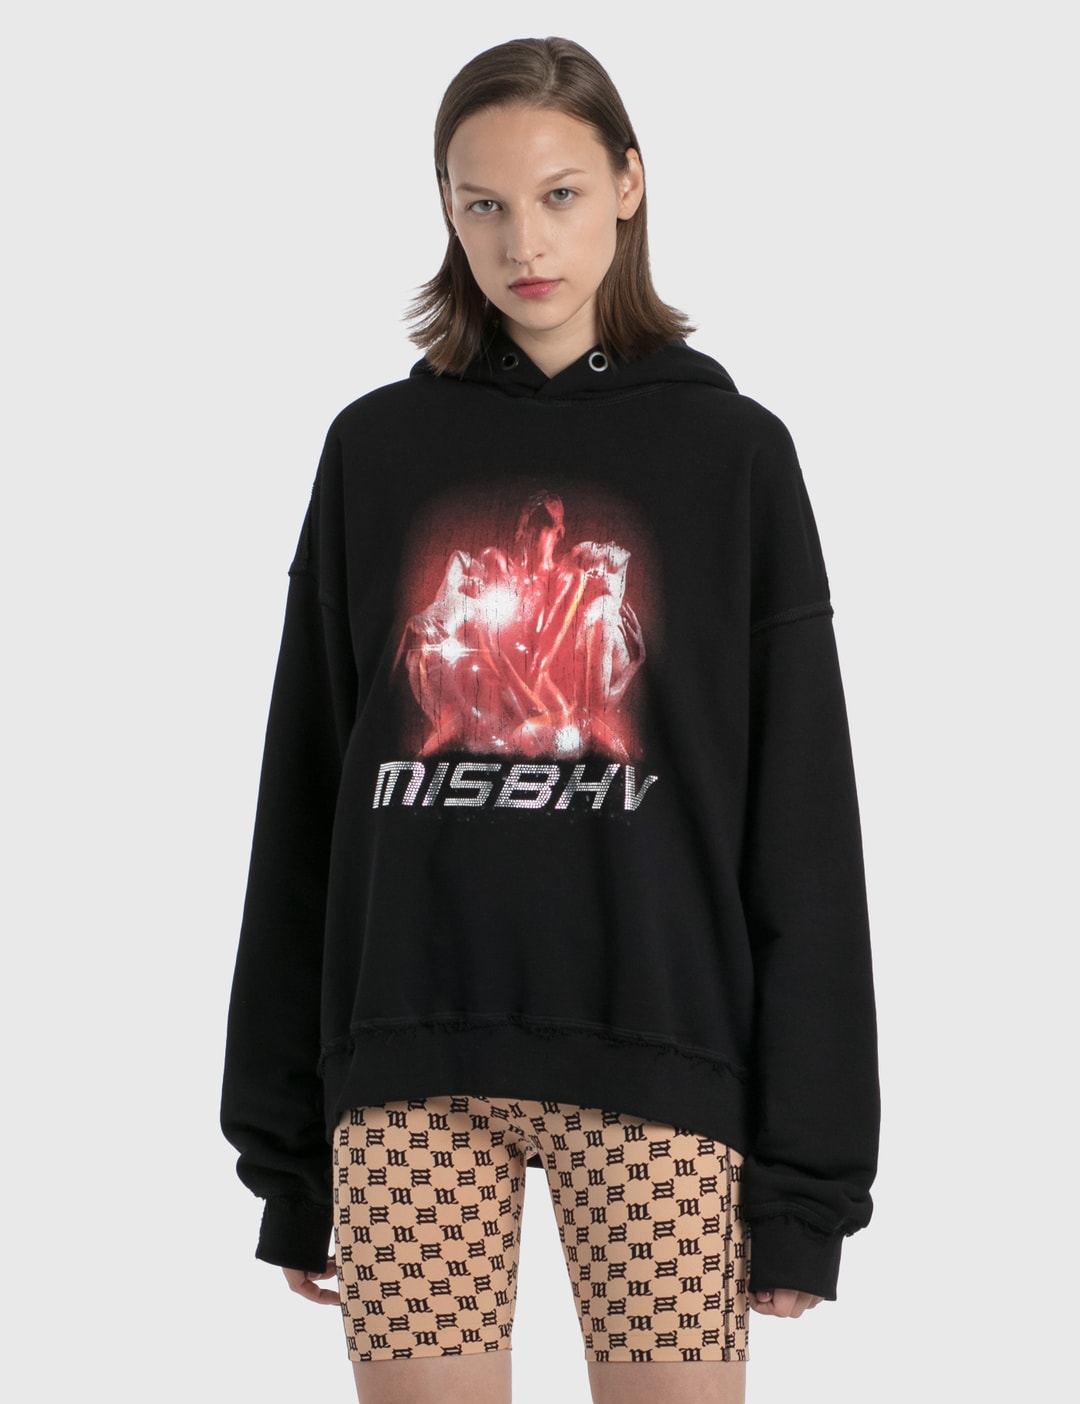 Misbhv - 2001 Hoodie | HBX - Globally Curated Fashion and Lifestyle by ...